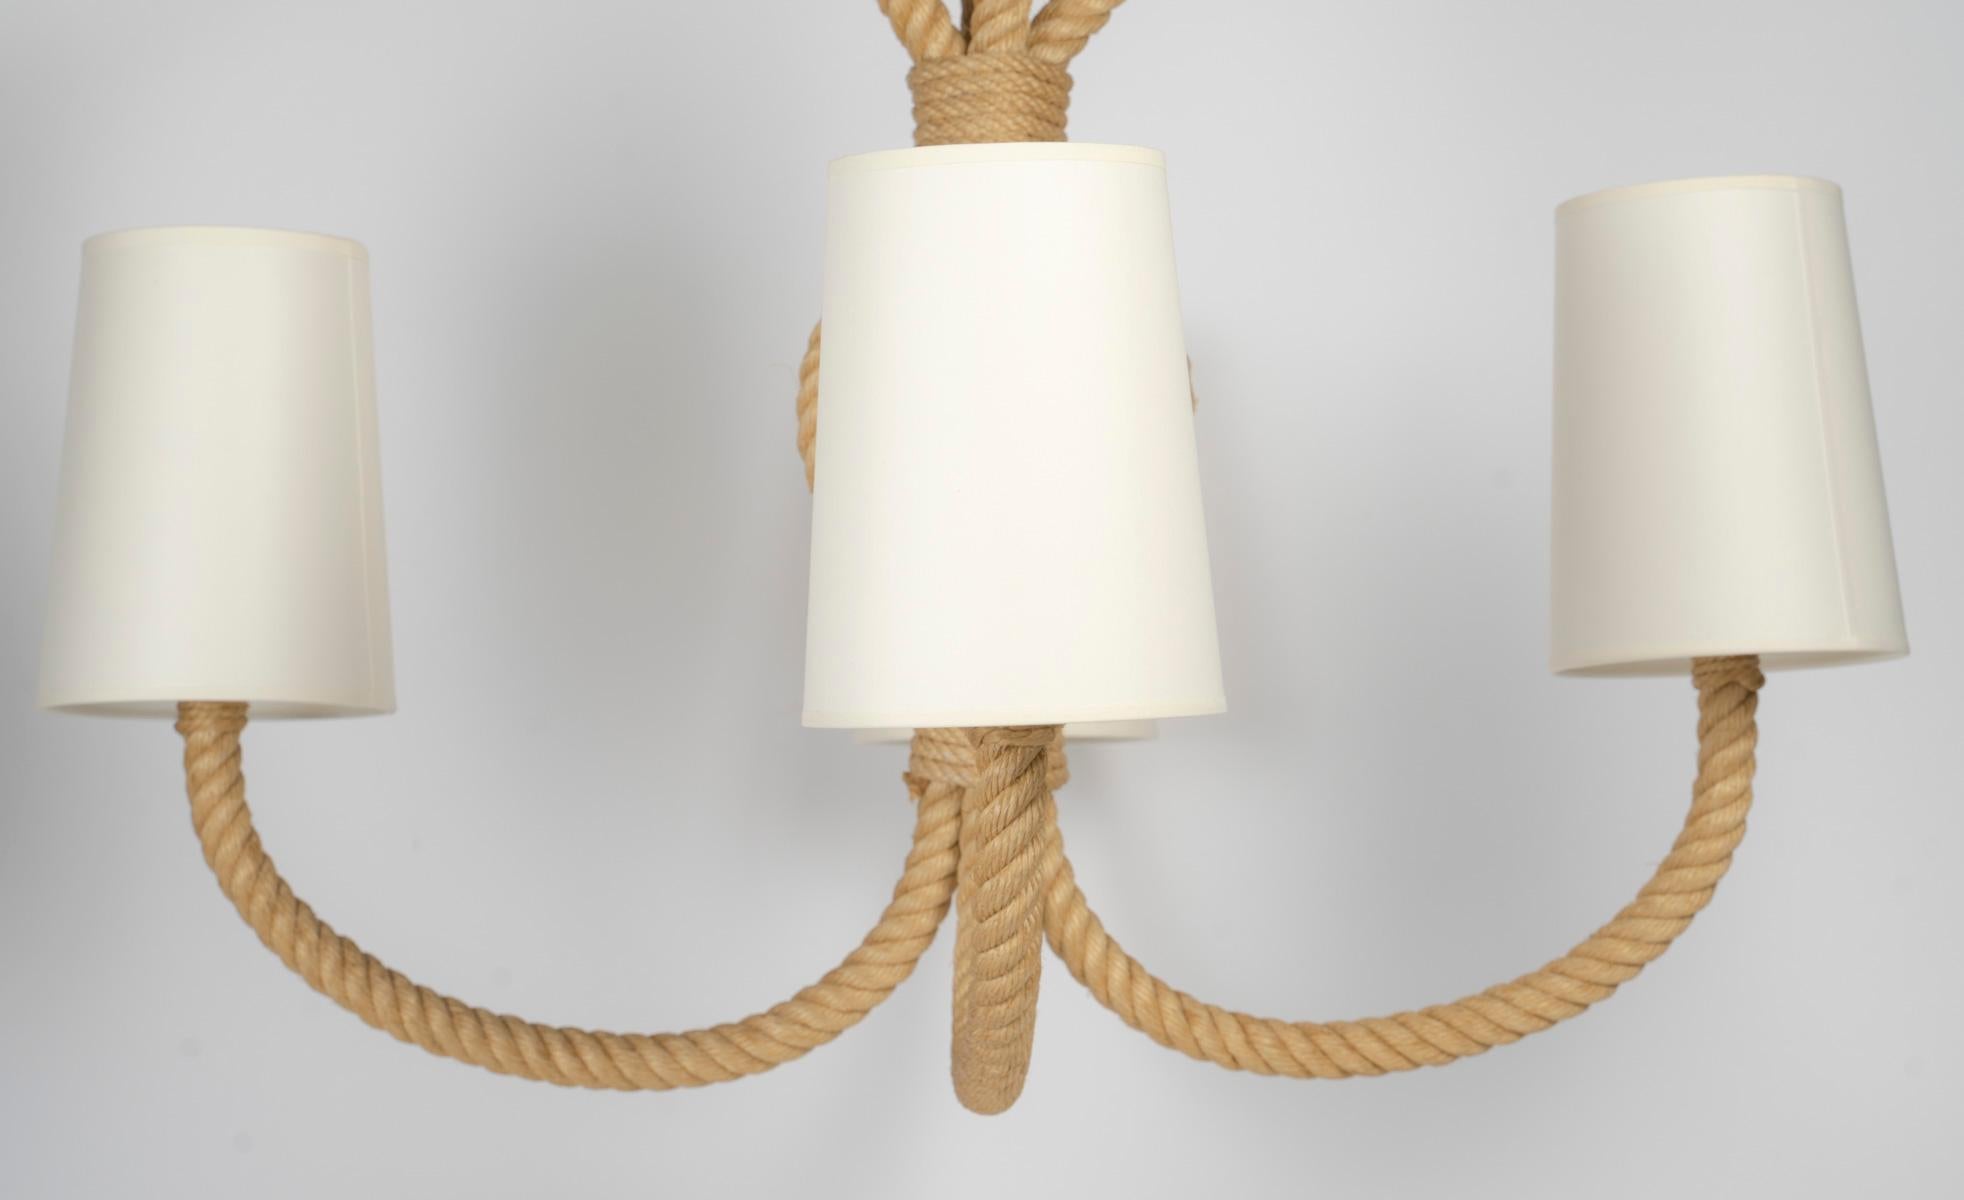  1950 Large Rope Chandelier by Adrien Audoux & Frida Minet For Sale 1